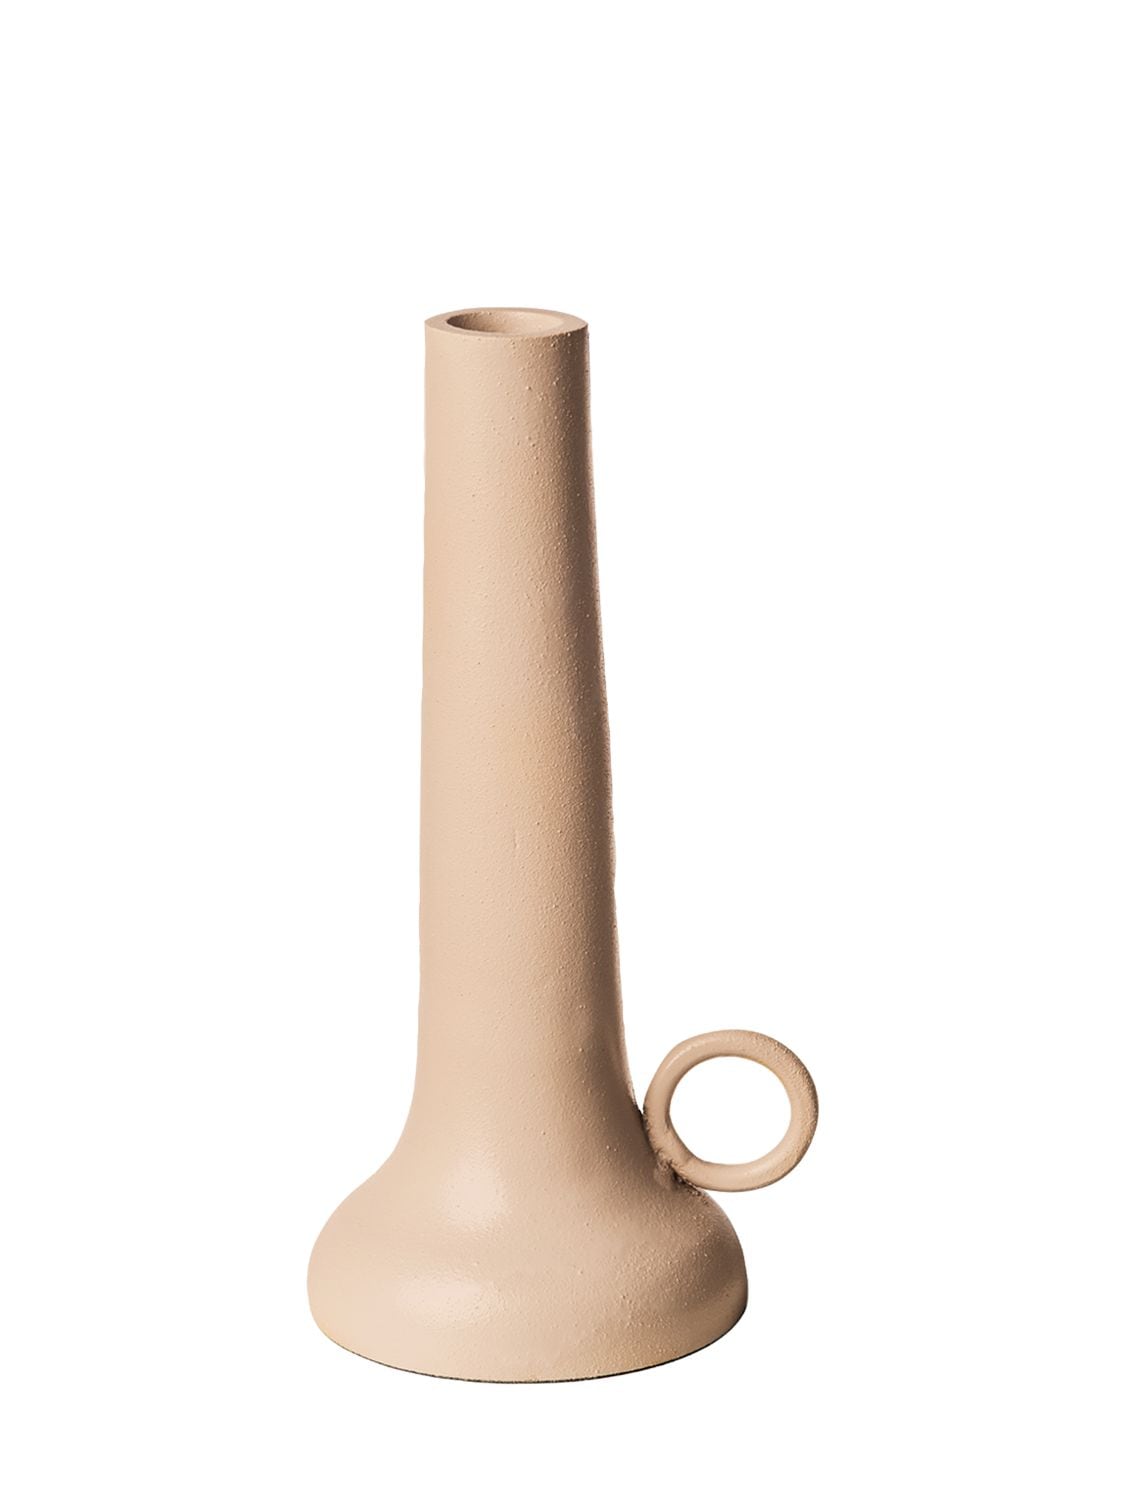 Image of Spartan Small Beige Candle Holder